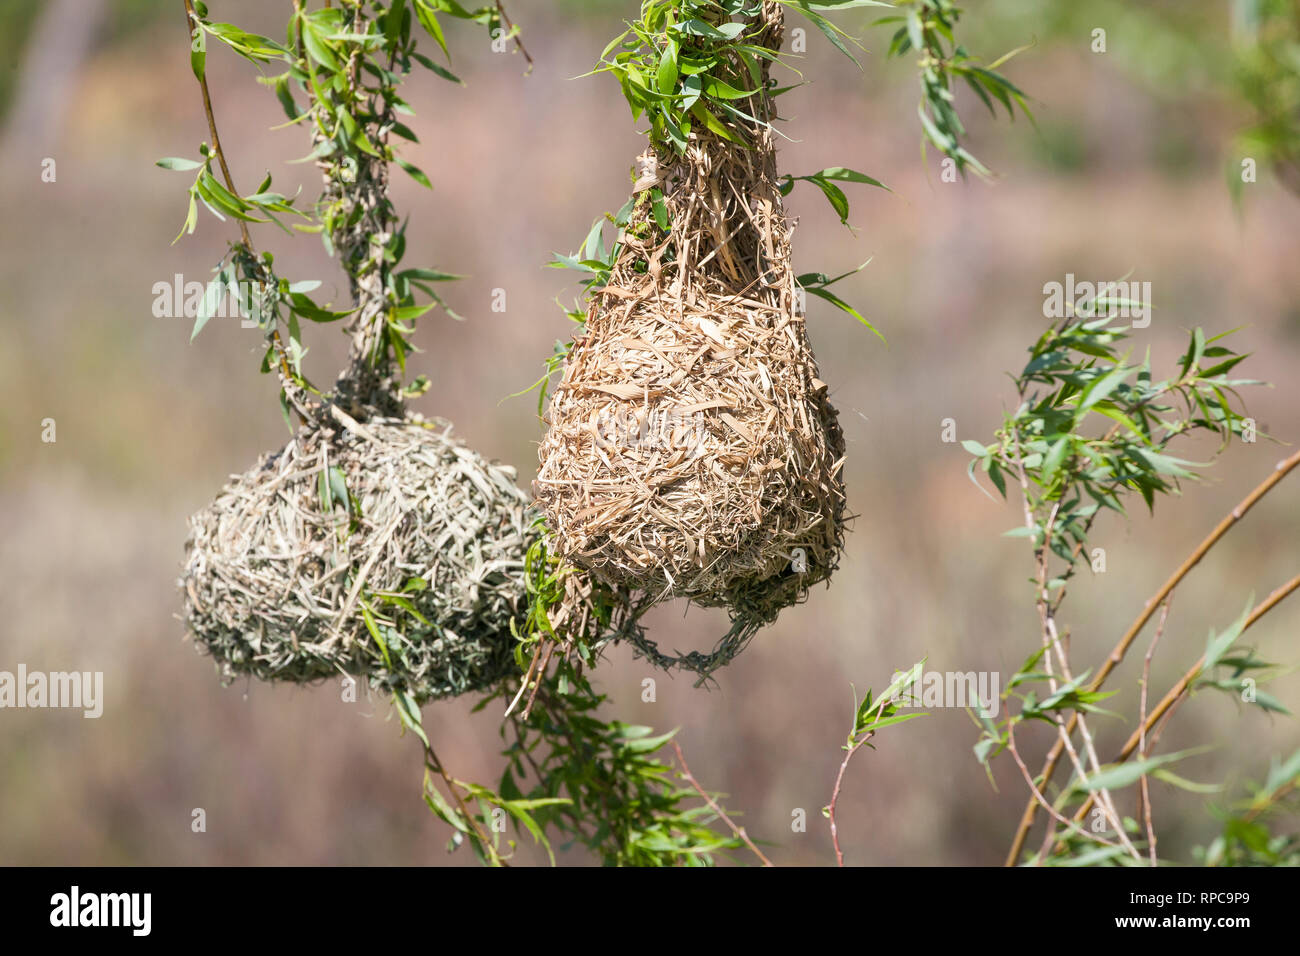 Nest of a Cape Weaver bird, Ploceus capensis woven from grass and straw onto the branches of a weeping willow tree over water. Close up detail Stock Photo